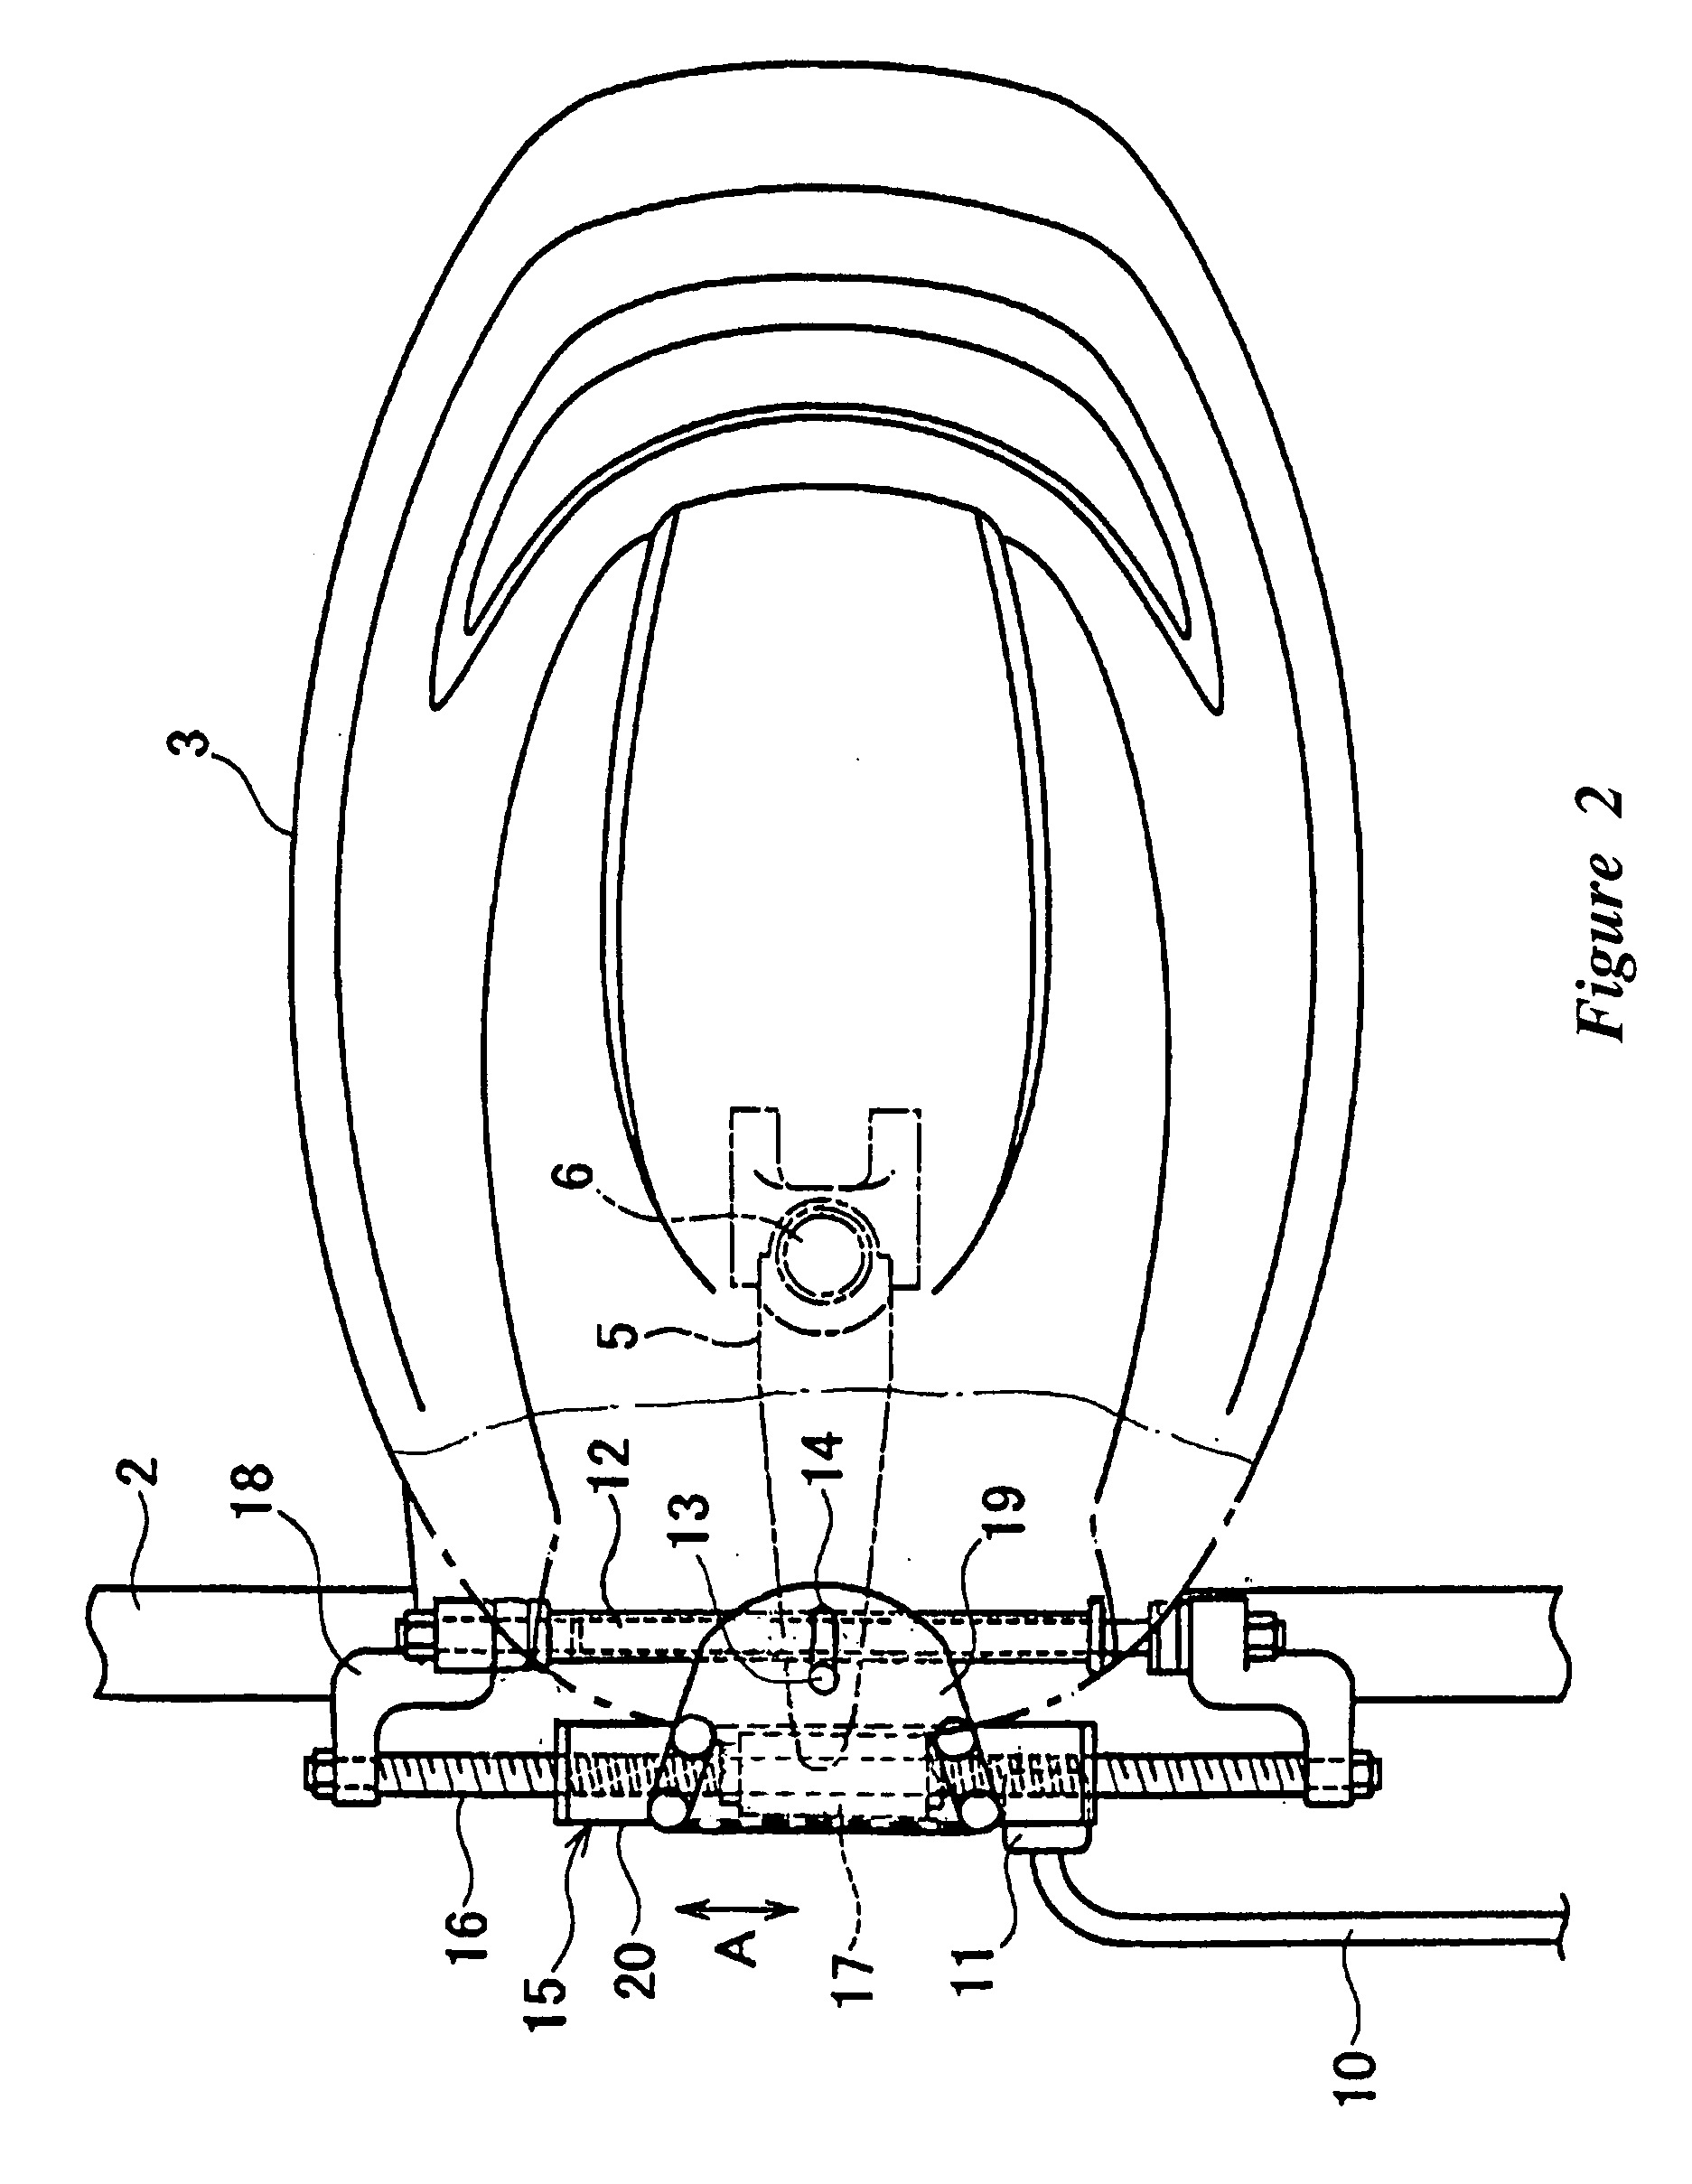 Method and system for steering watercraft